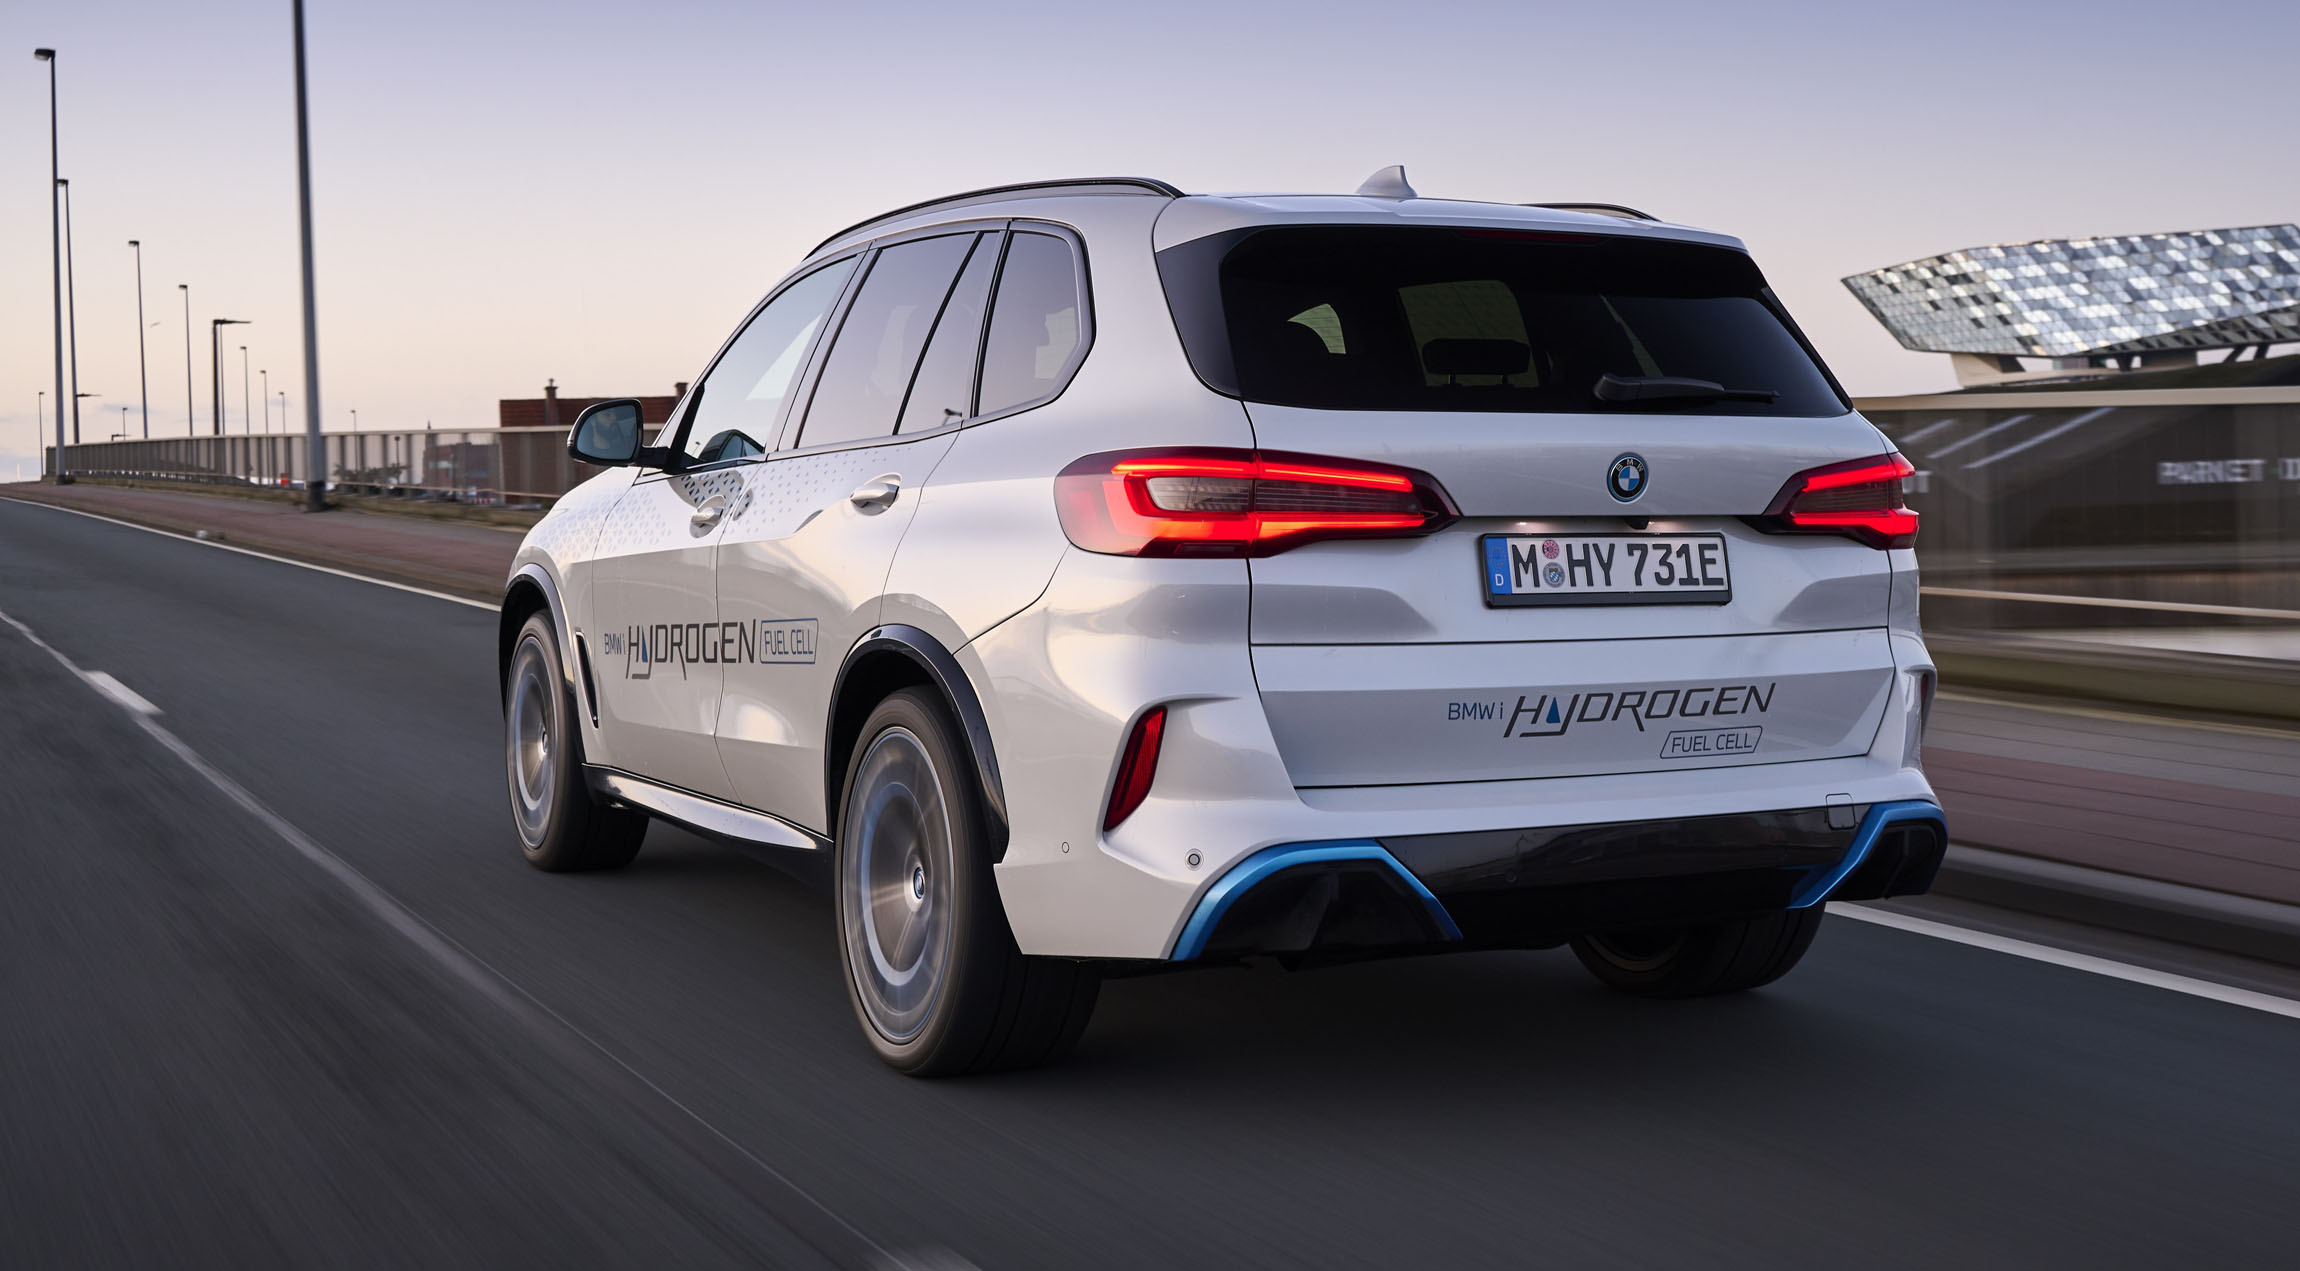 anglo american, bmw ix5 hydrogen, sasol, hydrogen-powered bmw x5 coming to south africa – details